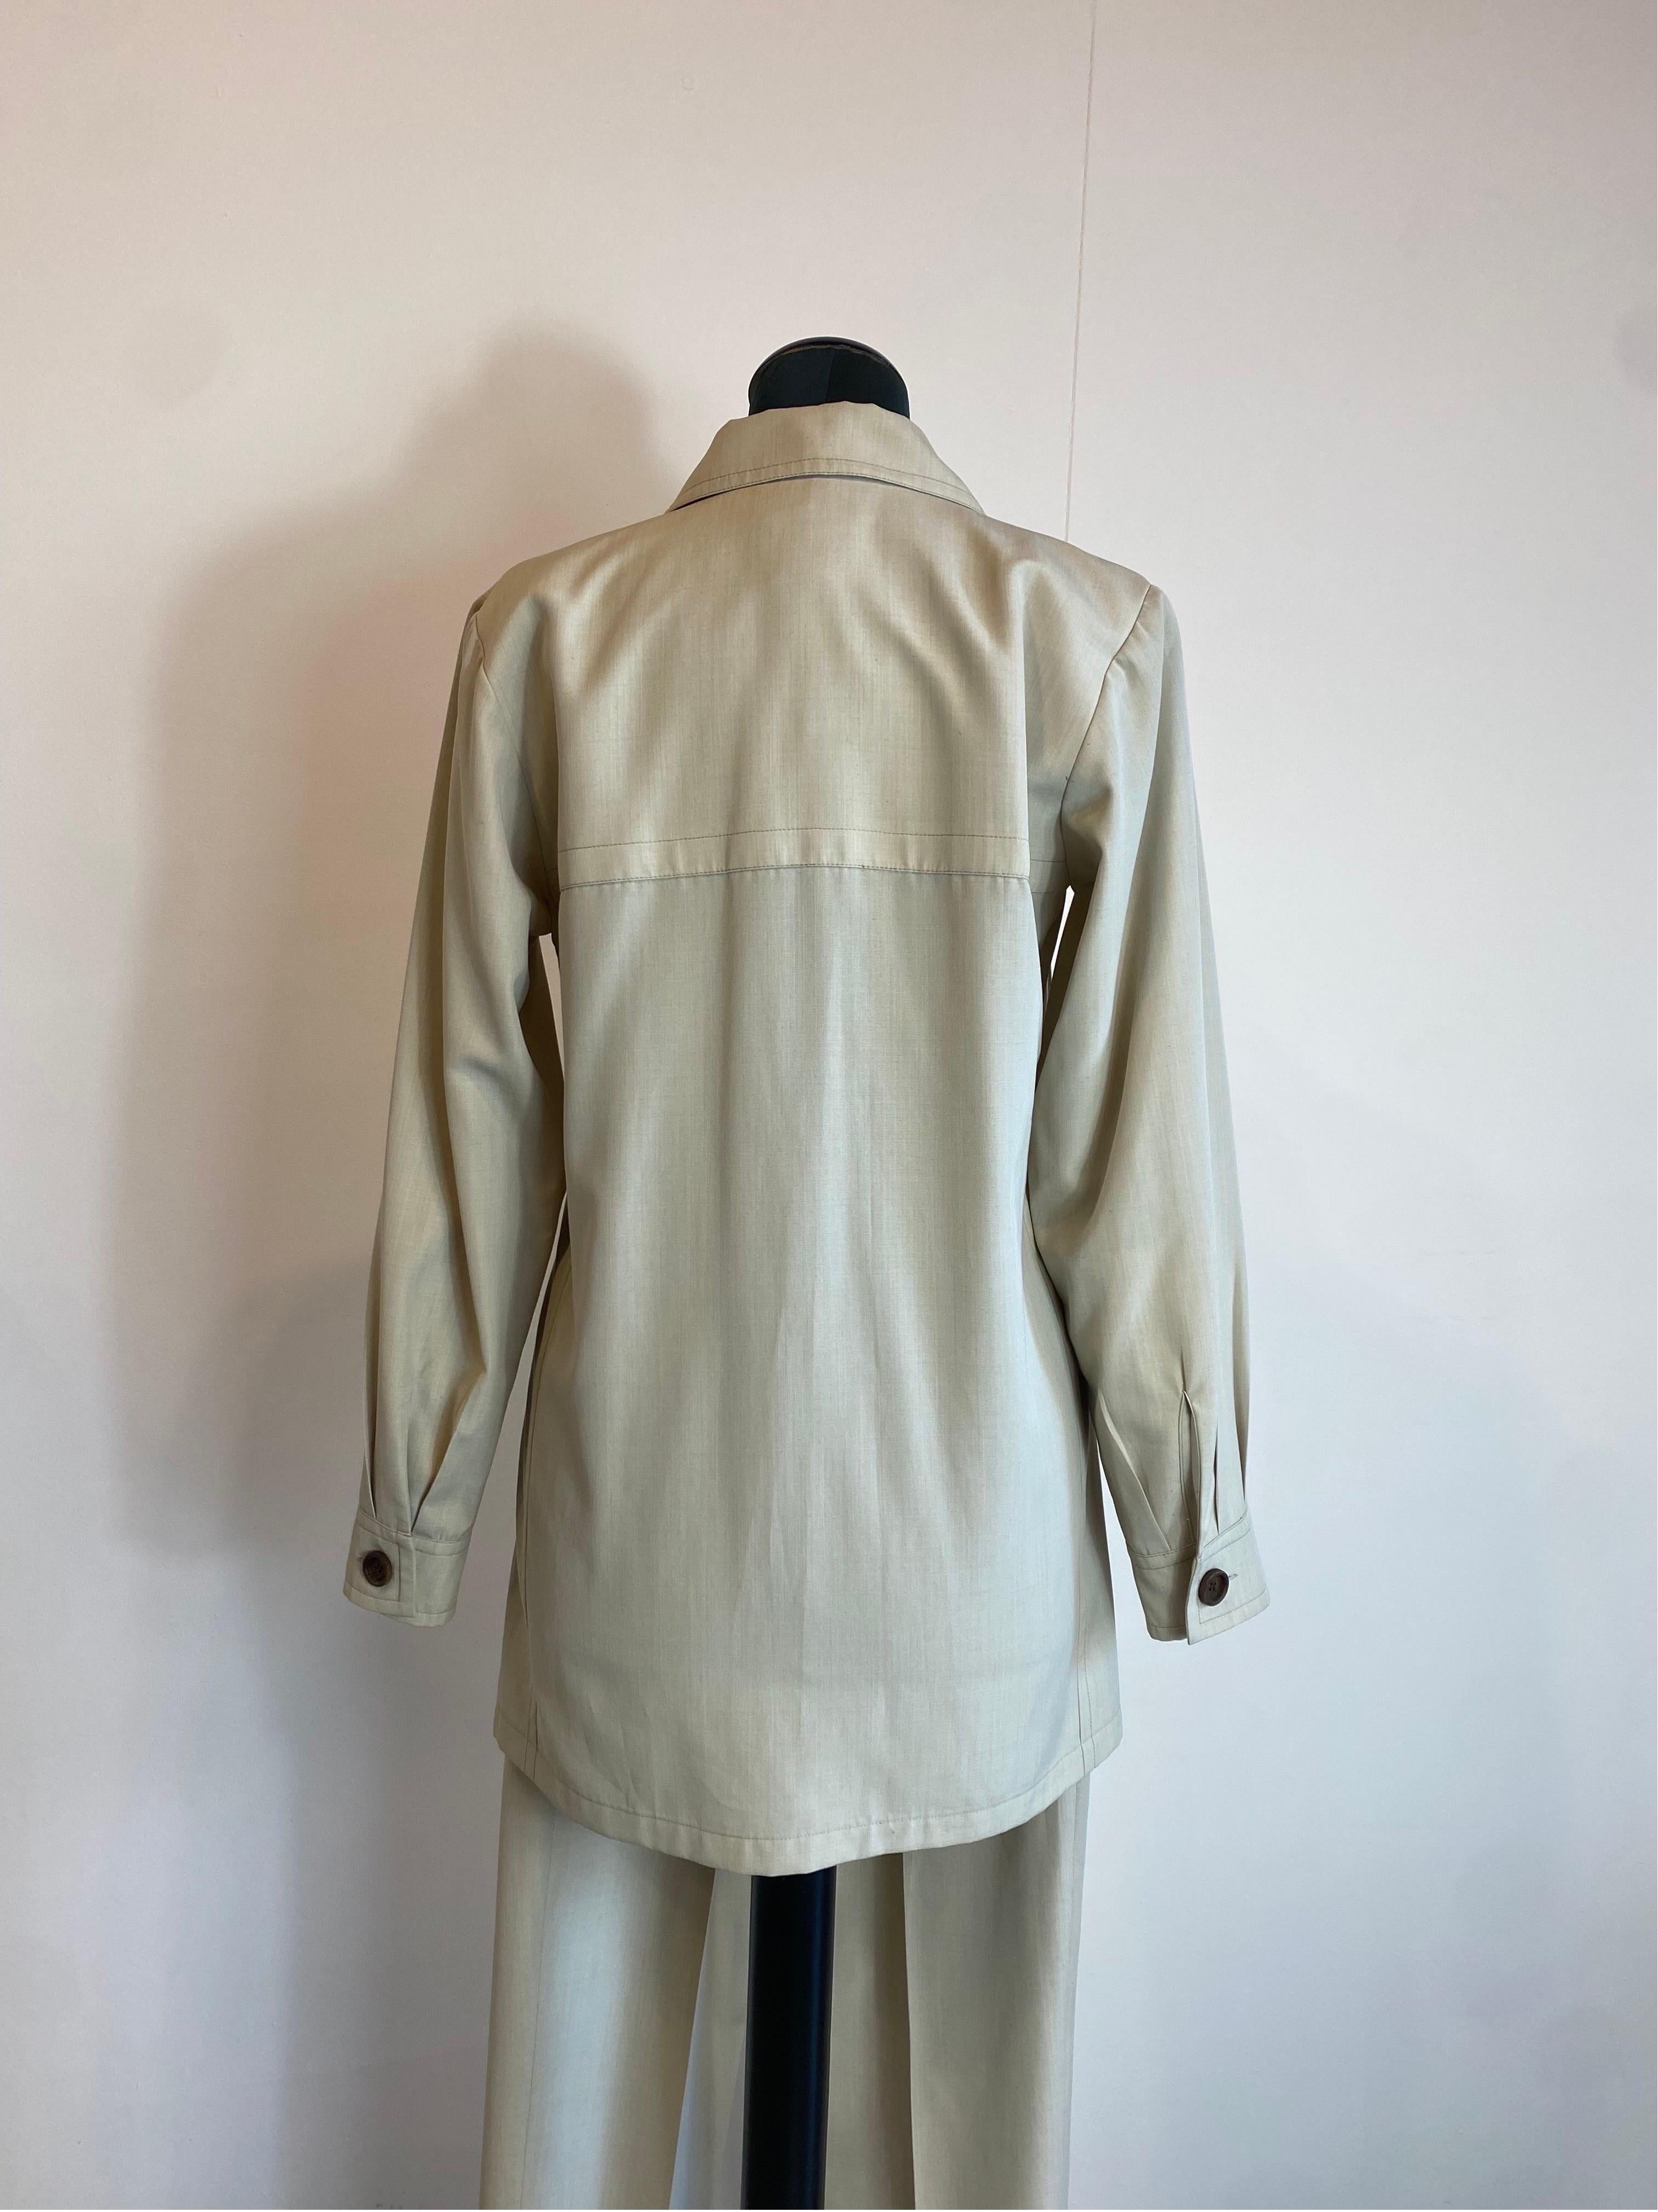 Women's or Men's Yves Saint Laurent Variation iconic Sahariana Blouse and Pants Suit For Sale